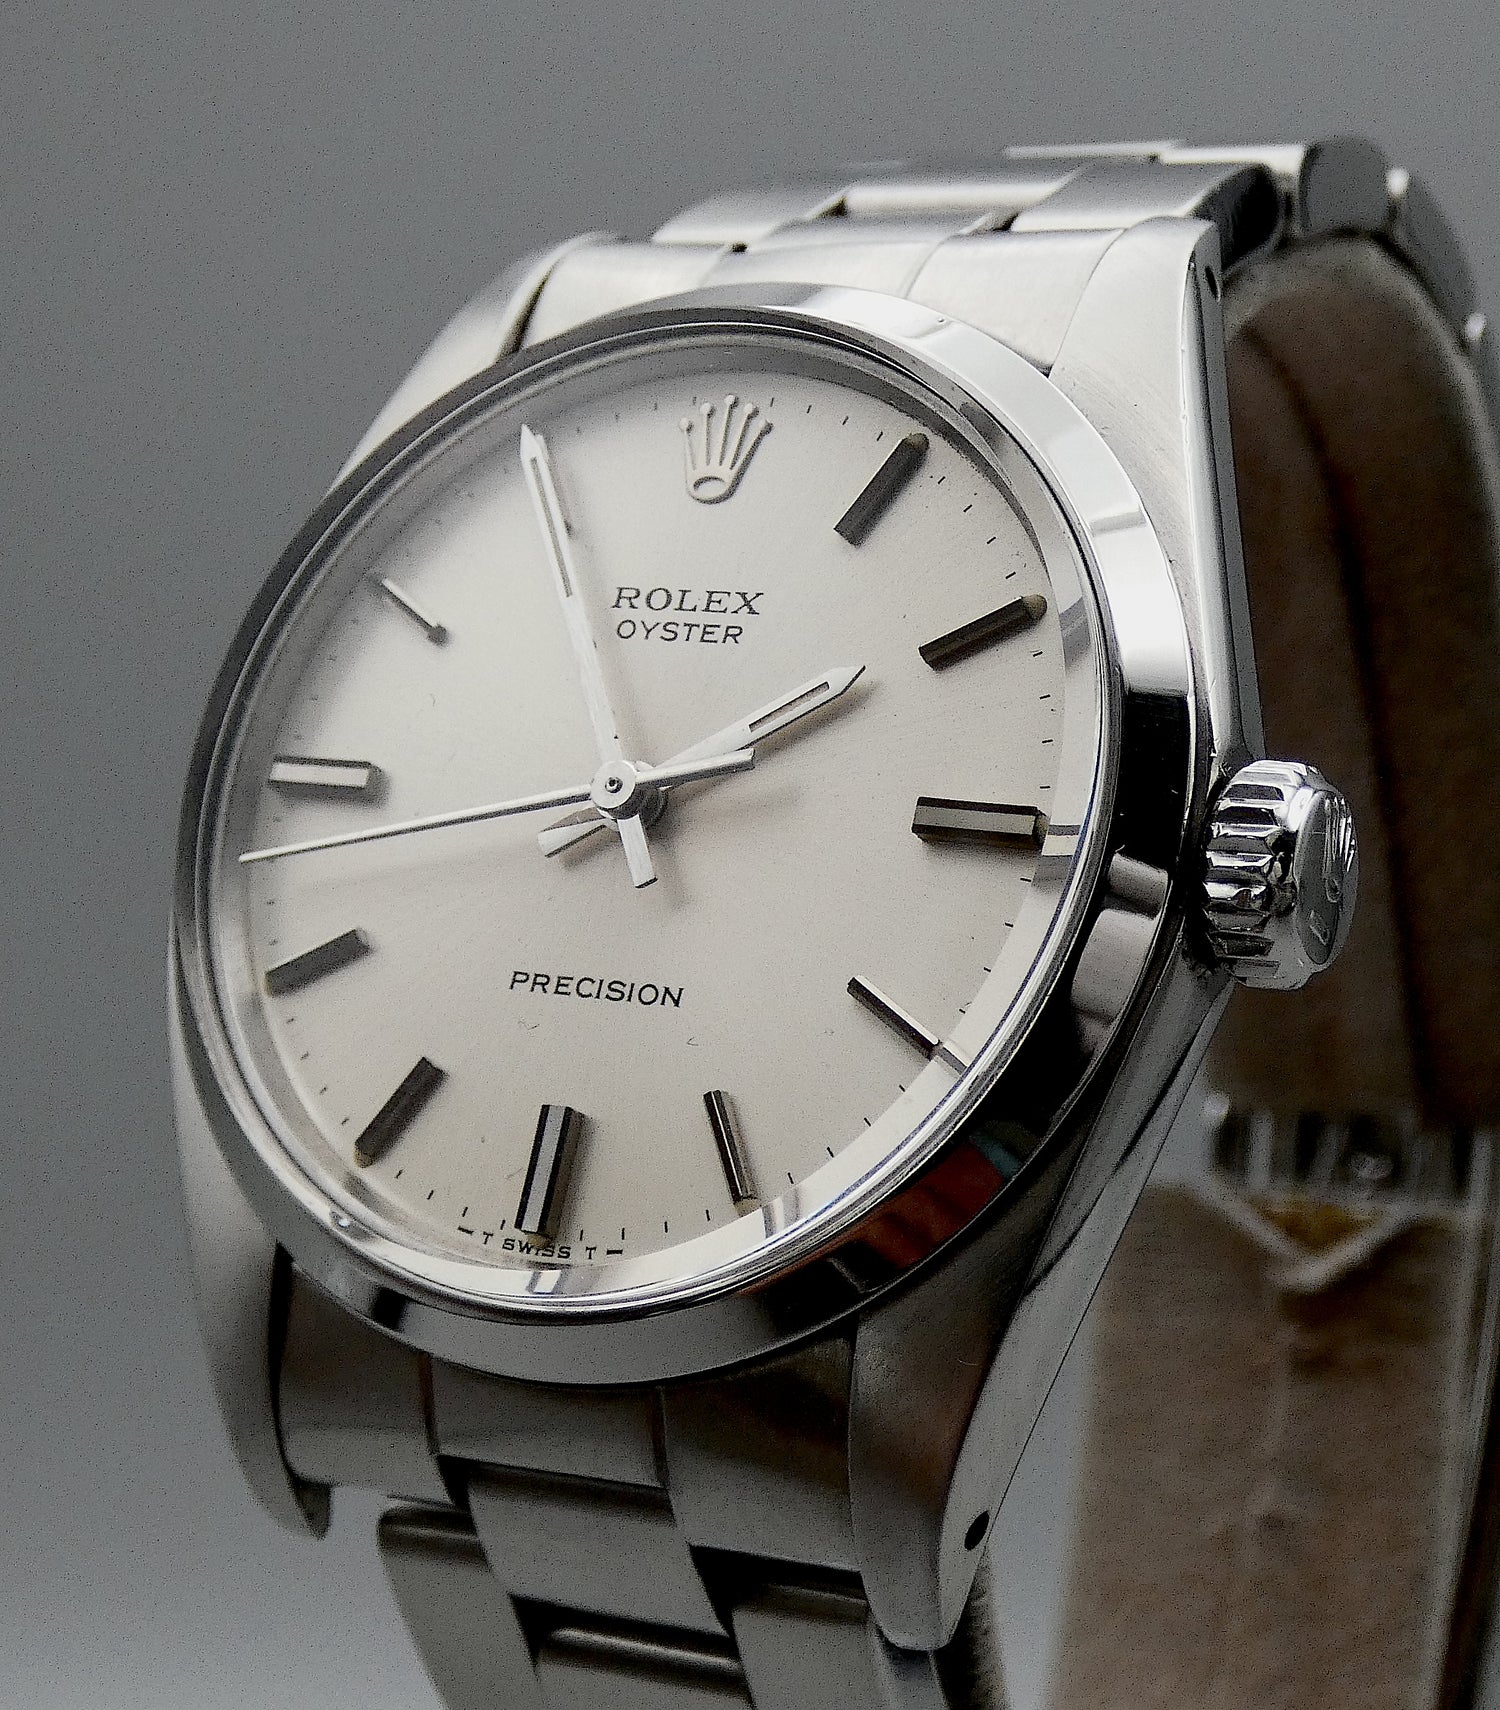 SOLD Rolex Oyster Precision 6426 B&P - overhauled/serviced - great condition